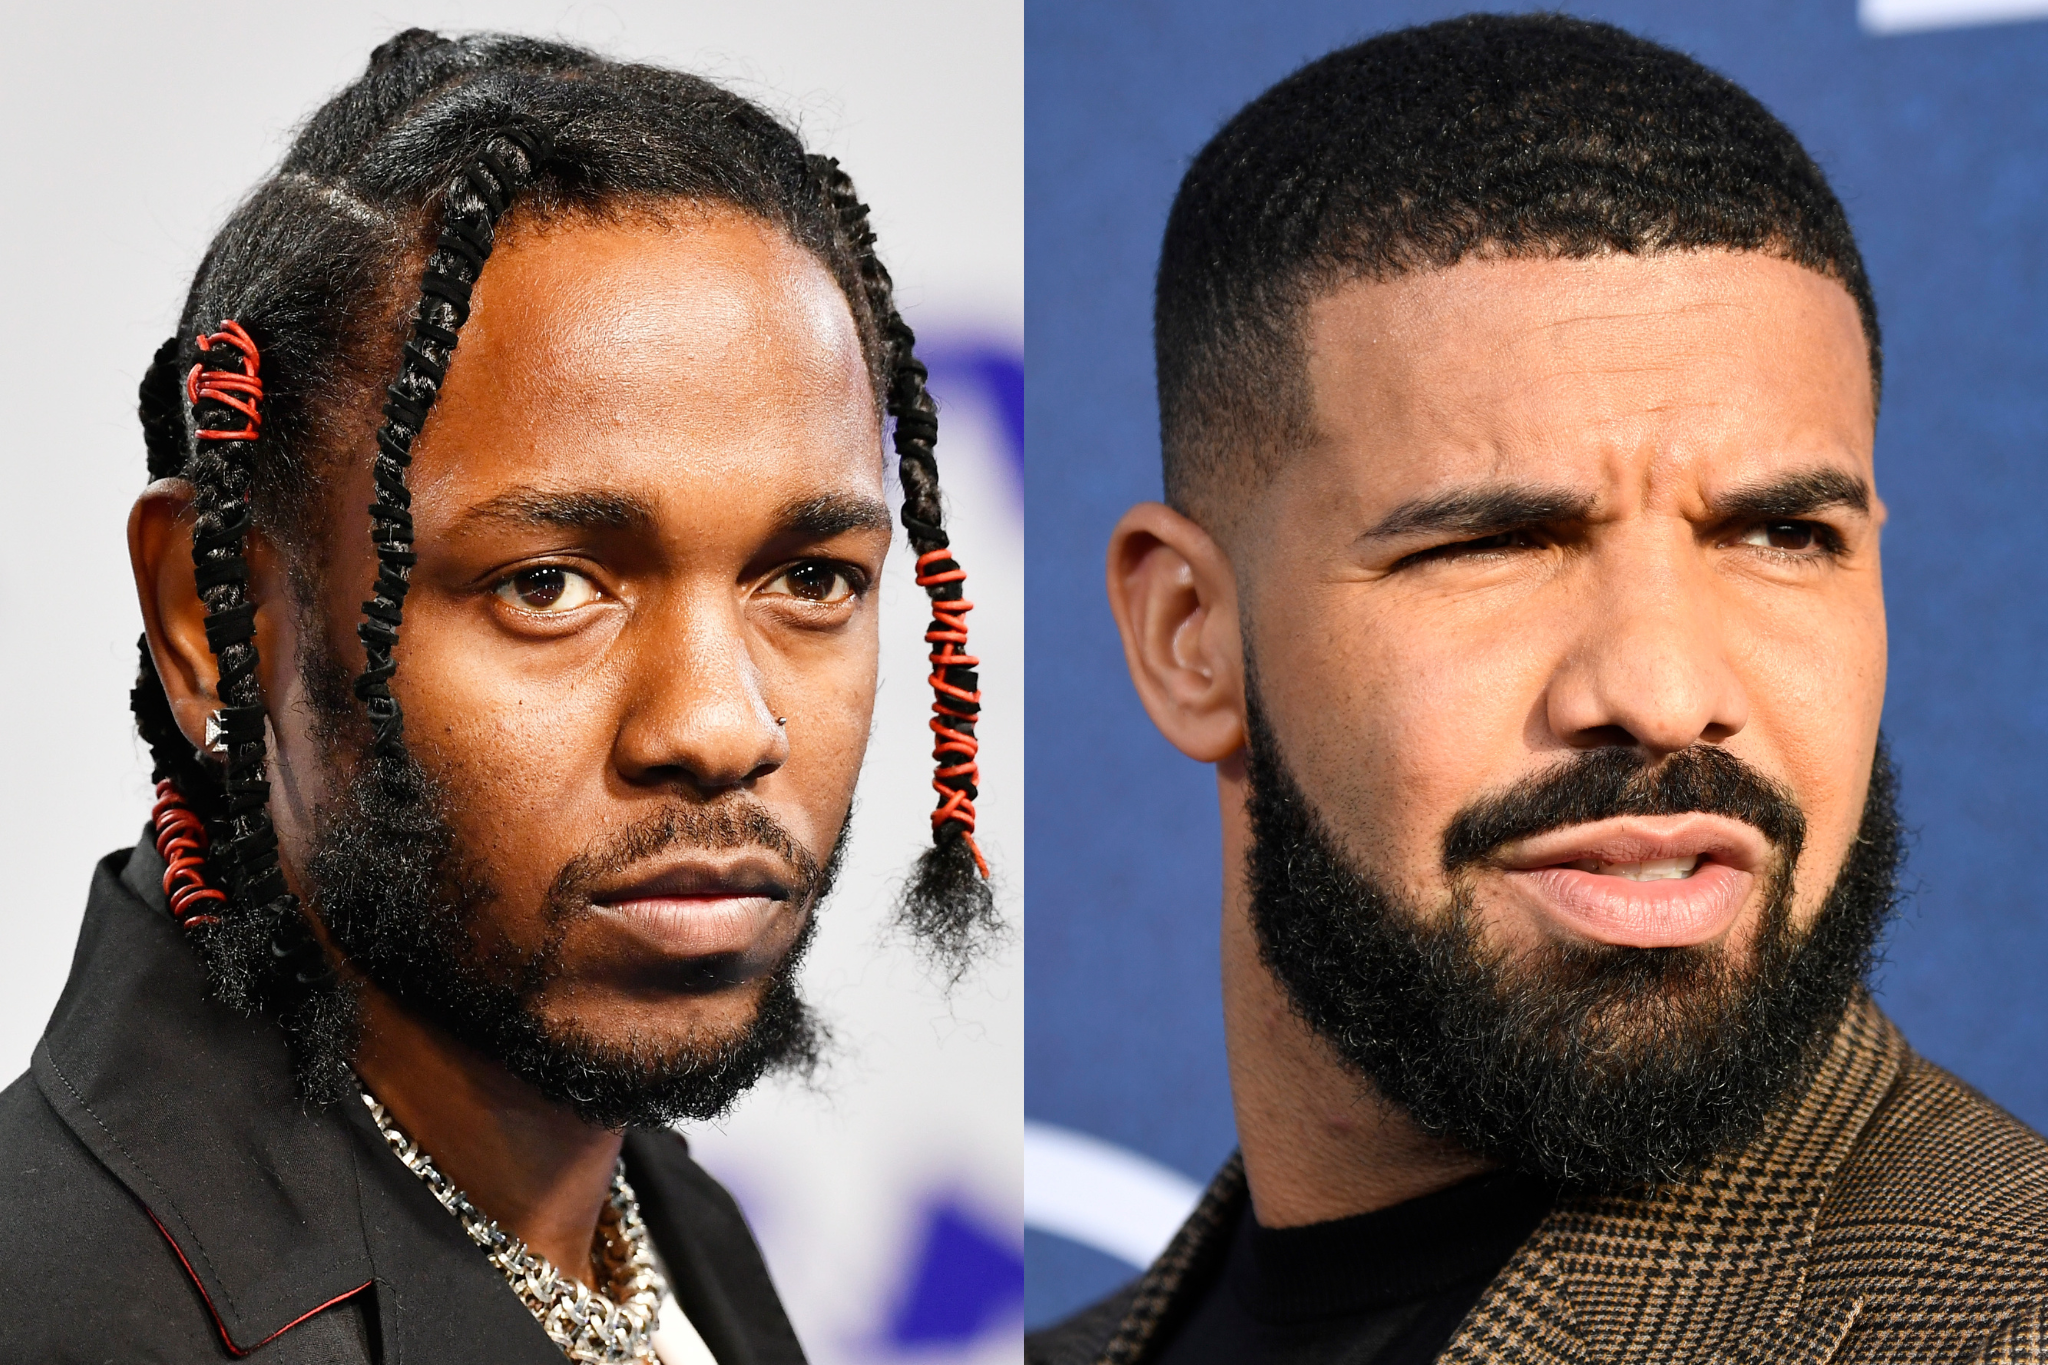 Kendrick Lamar and Drake have been embroiled in an ongoing feud